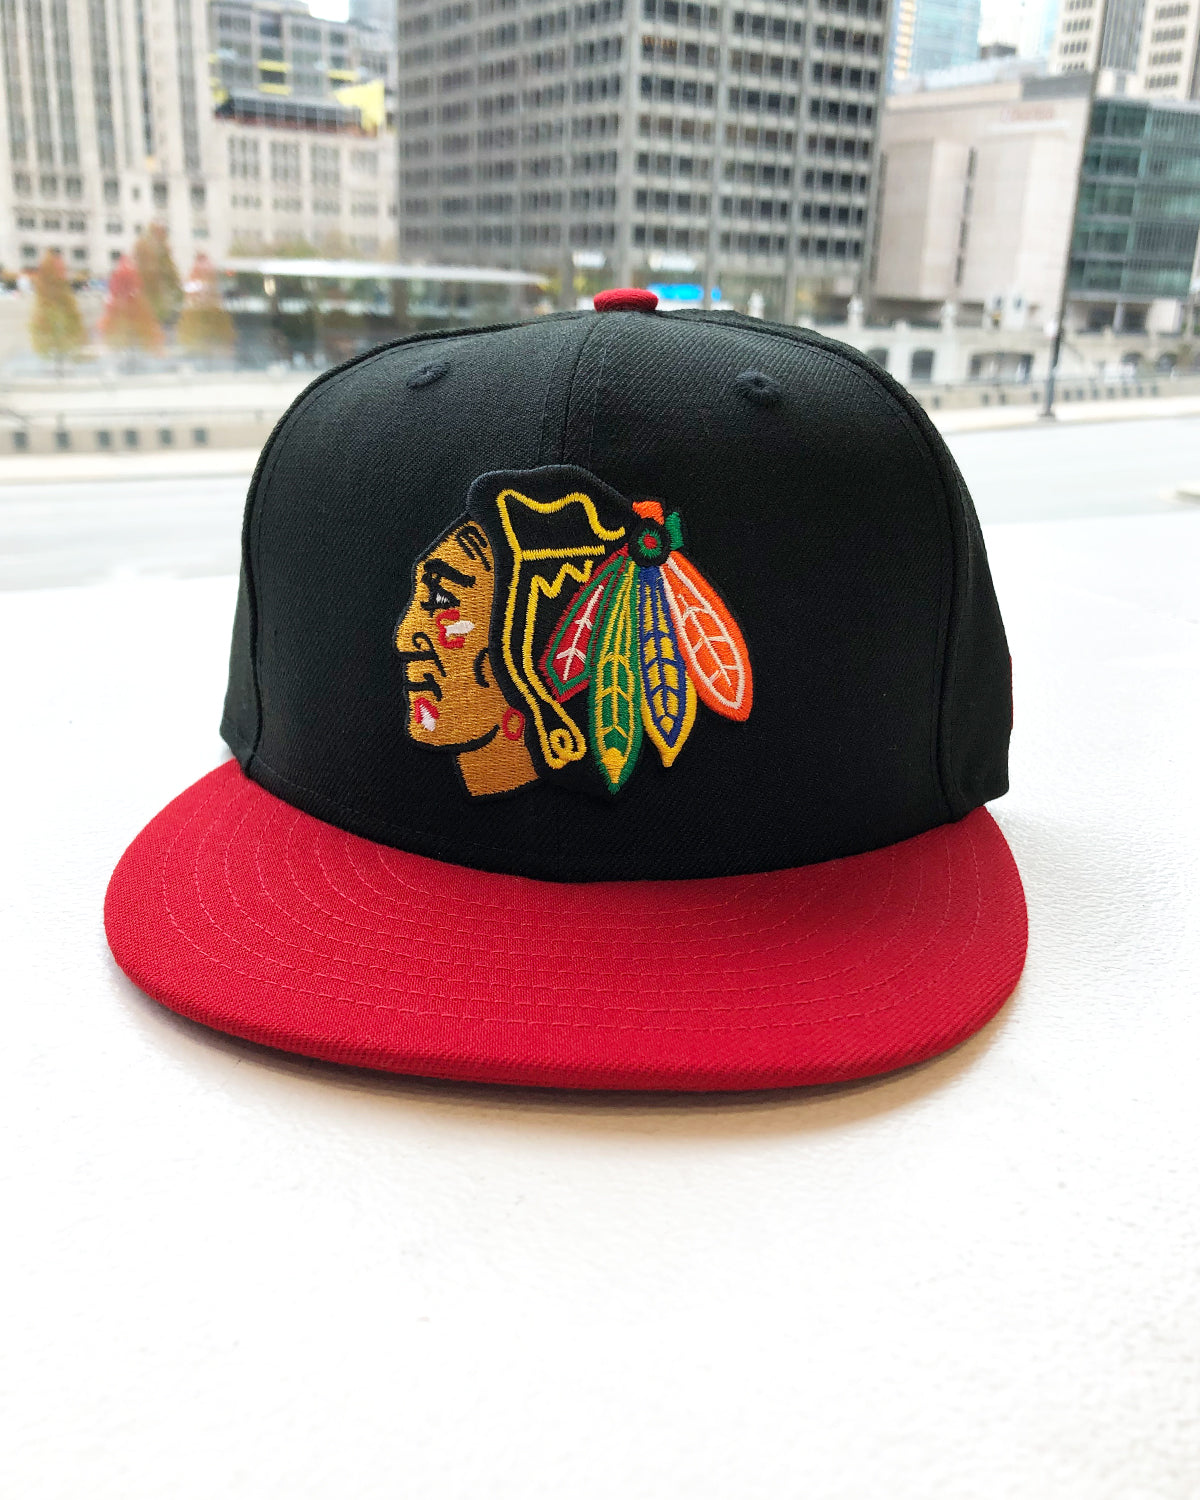 New Era Chicago Blackhawks 59FIFTY Fitted Cap